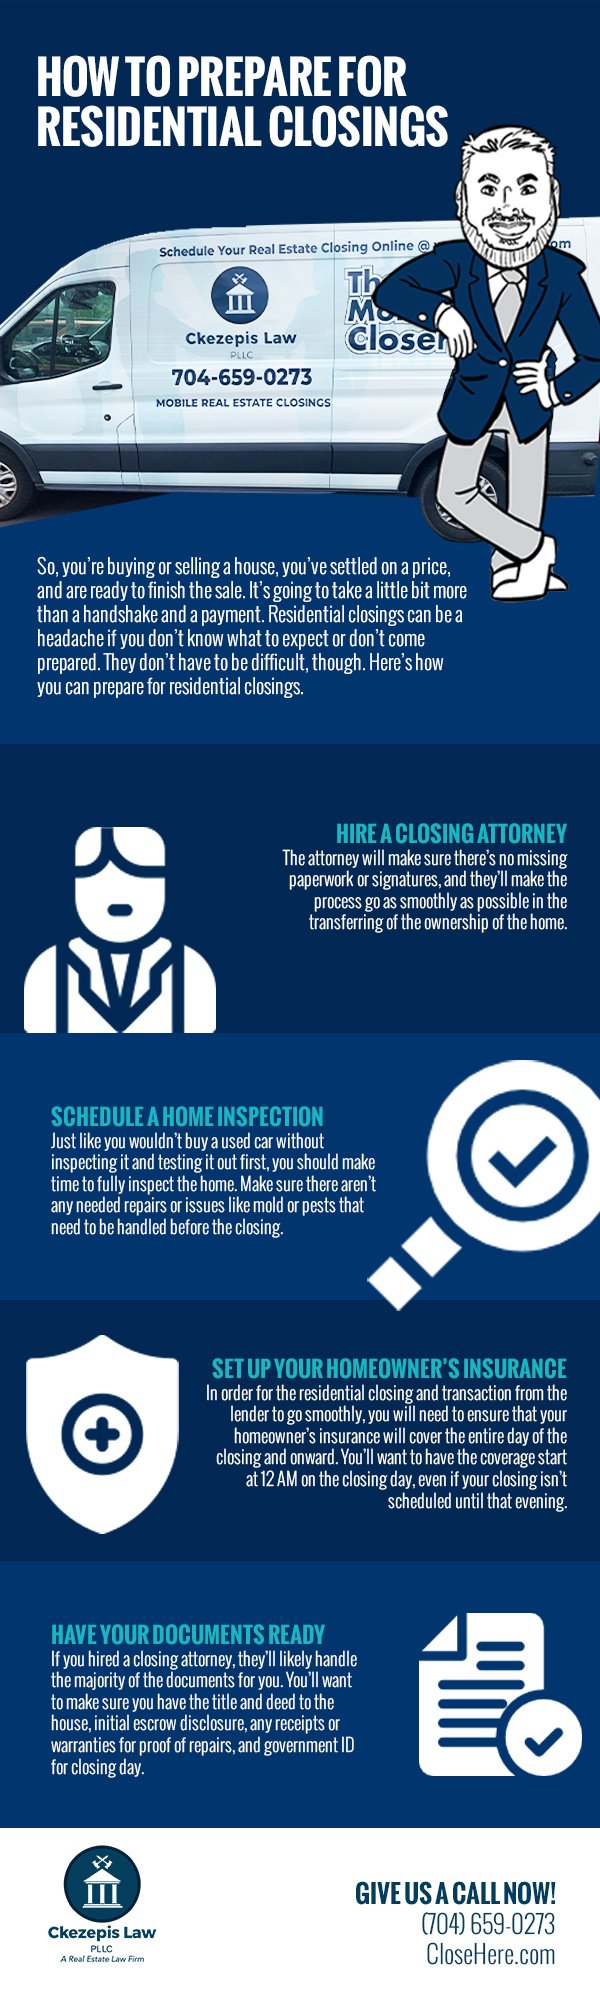 How to Prepare for Residential Closings [infographic]